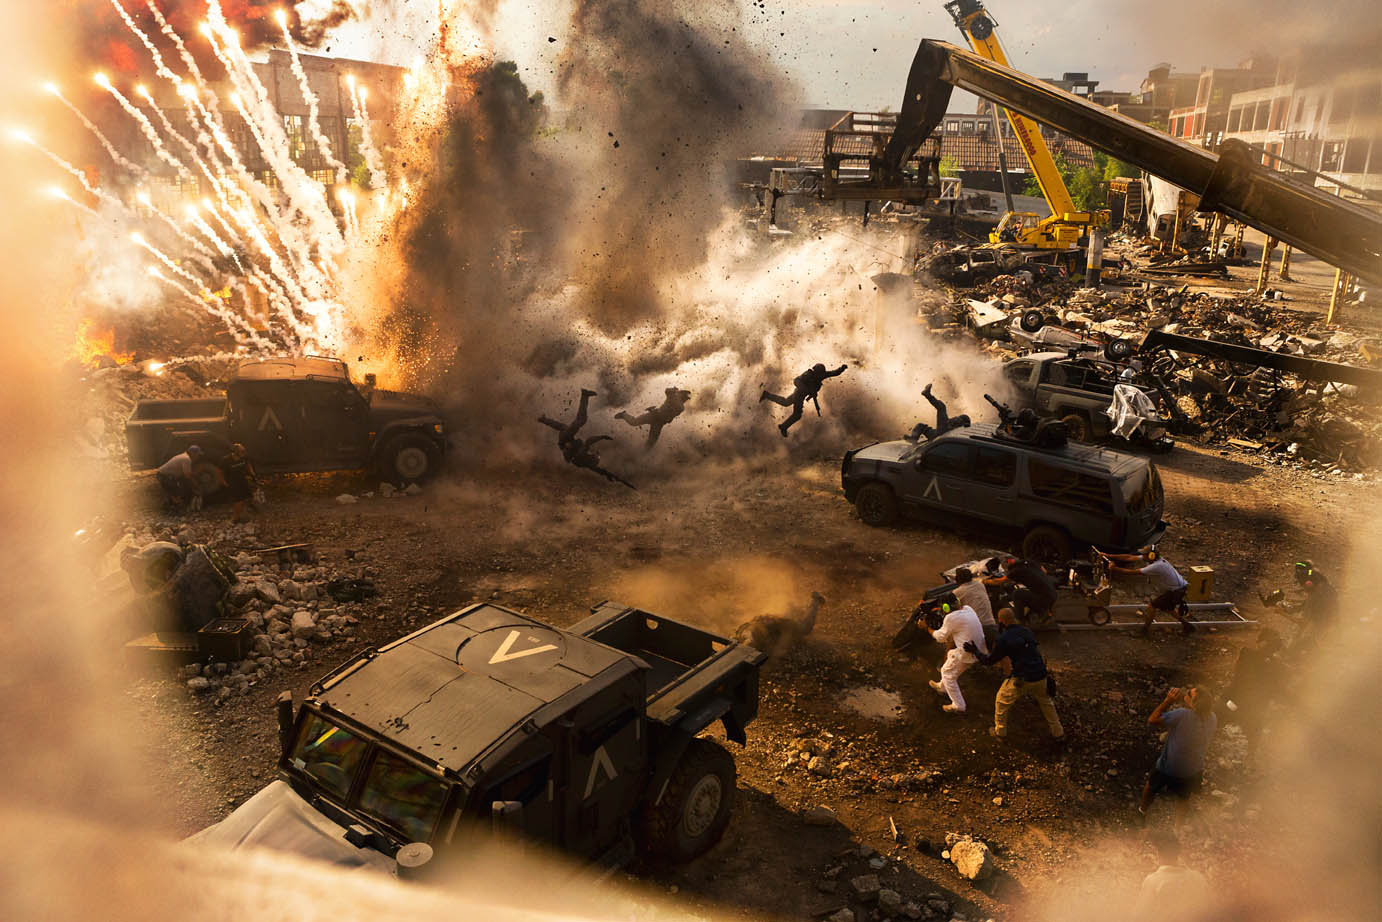 Director/Executive Producer Michael Bay on the set of TRANSFORMERS: THE LAST KNIGHT, from Paramount Pictures.